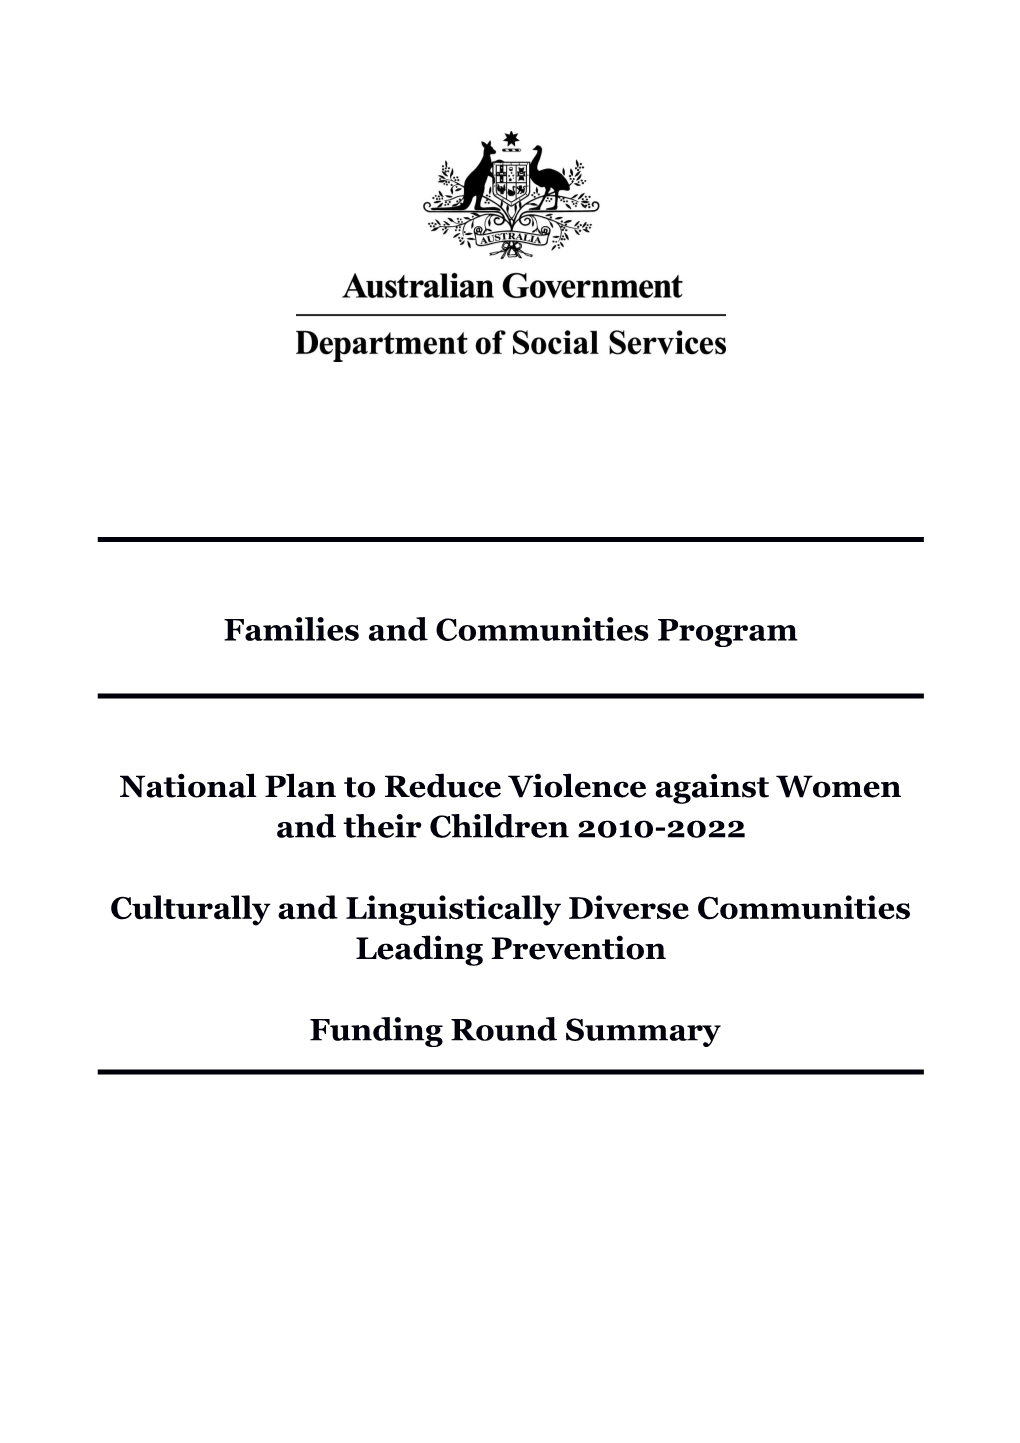 National Plan to Reduce Violence Against Women and Their Children 2010-2022